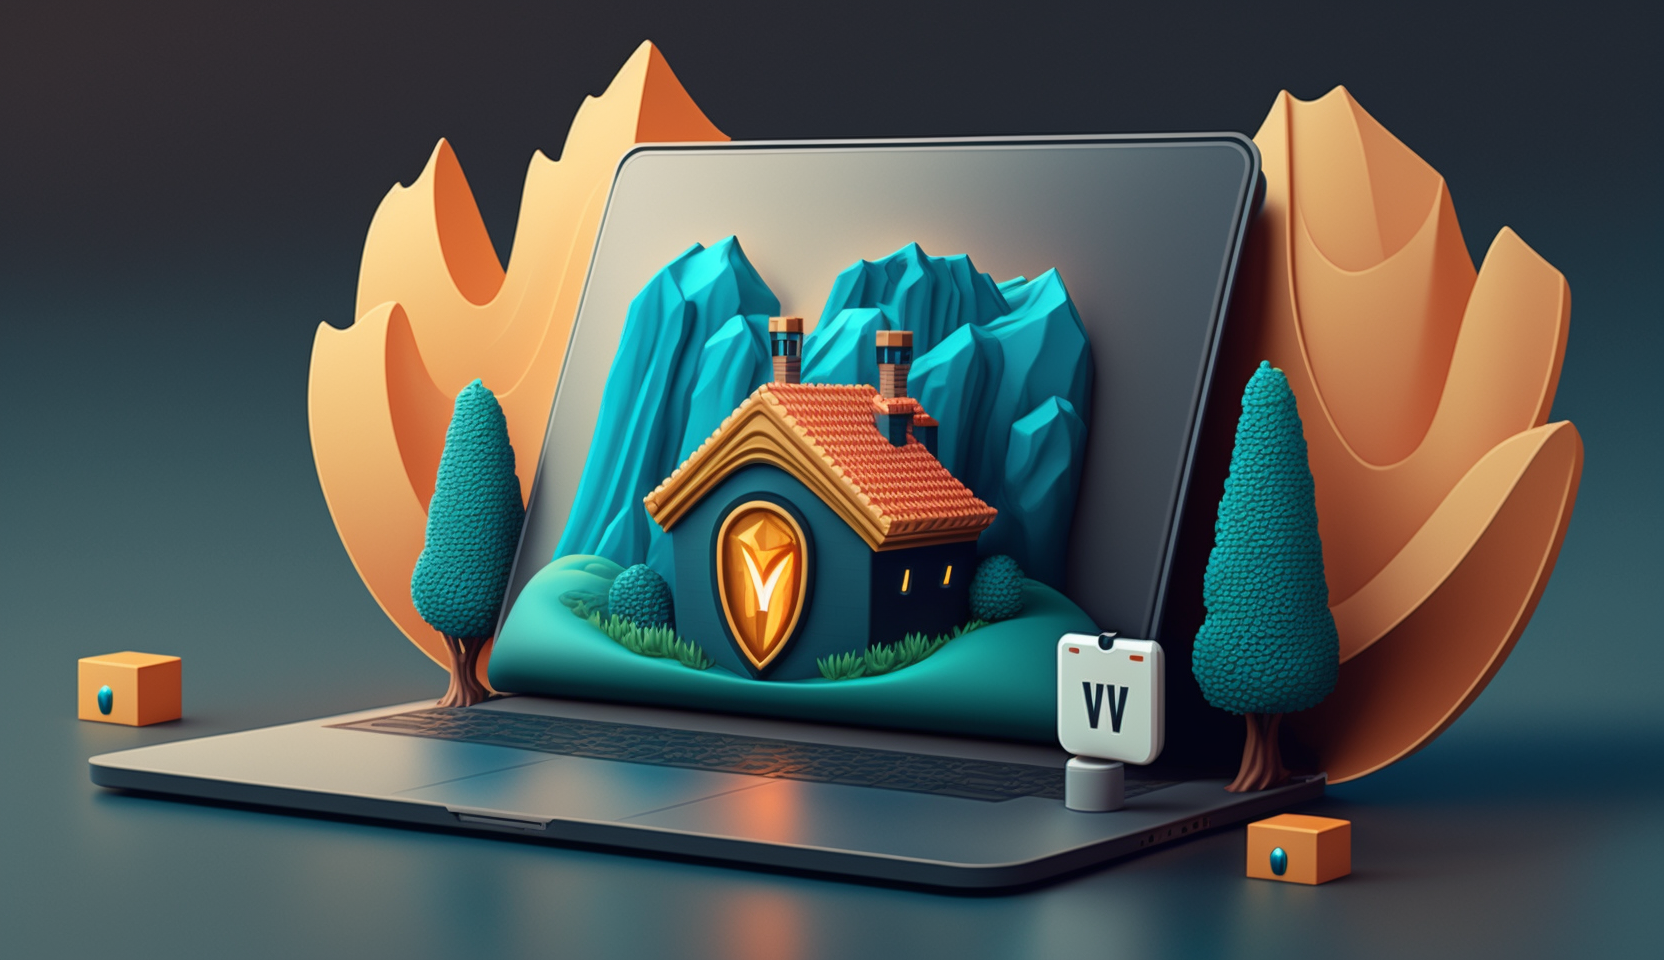 A 3D animated image depicting a secure tunnel connecting a remote worker's laptop to a company building, symbolizing the VPN connection. A shield icon hovers above the tunnel, representing security and resilience.